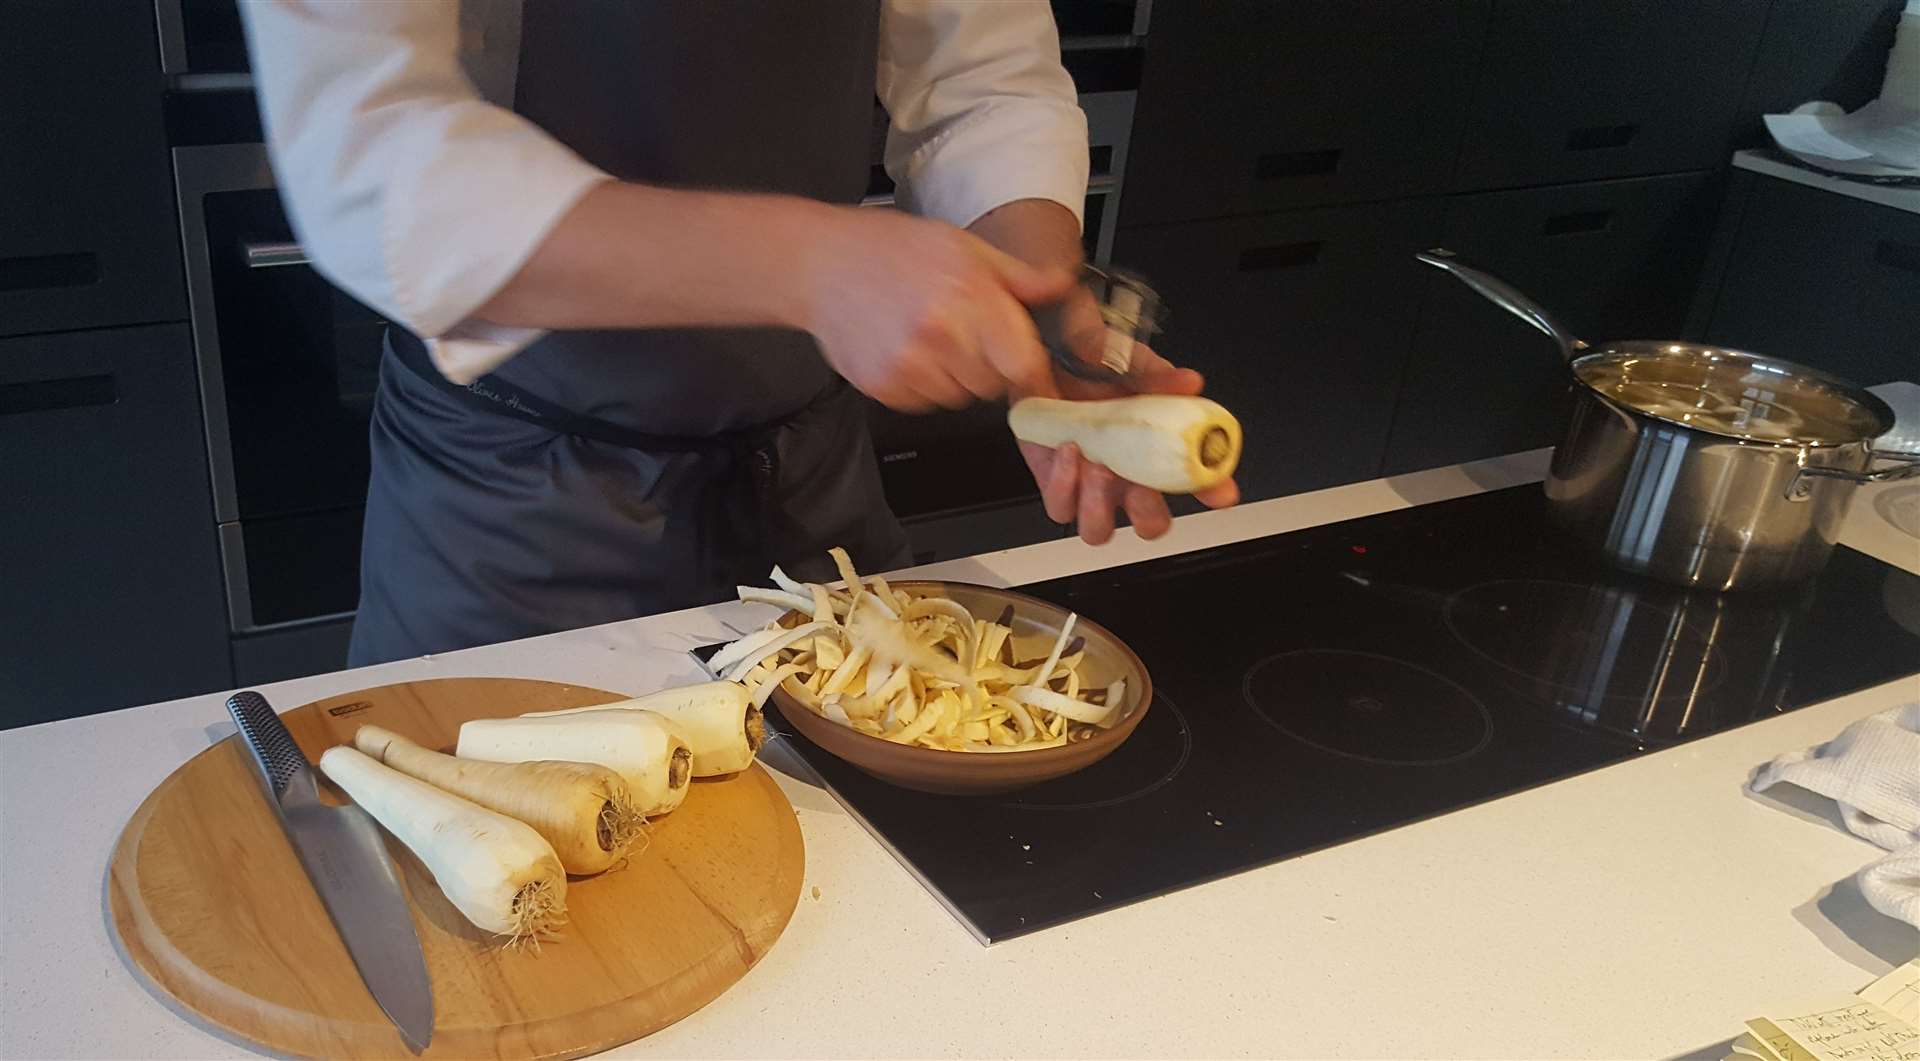 Preparing the parsnips, which are roasted for 20 minutes